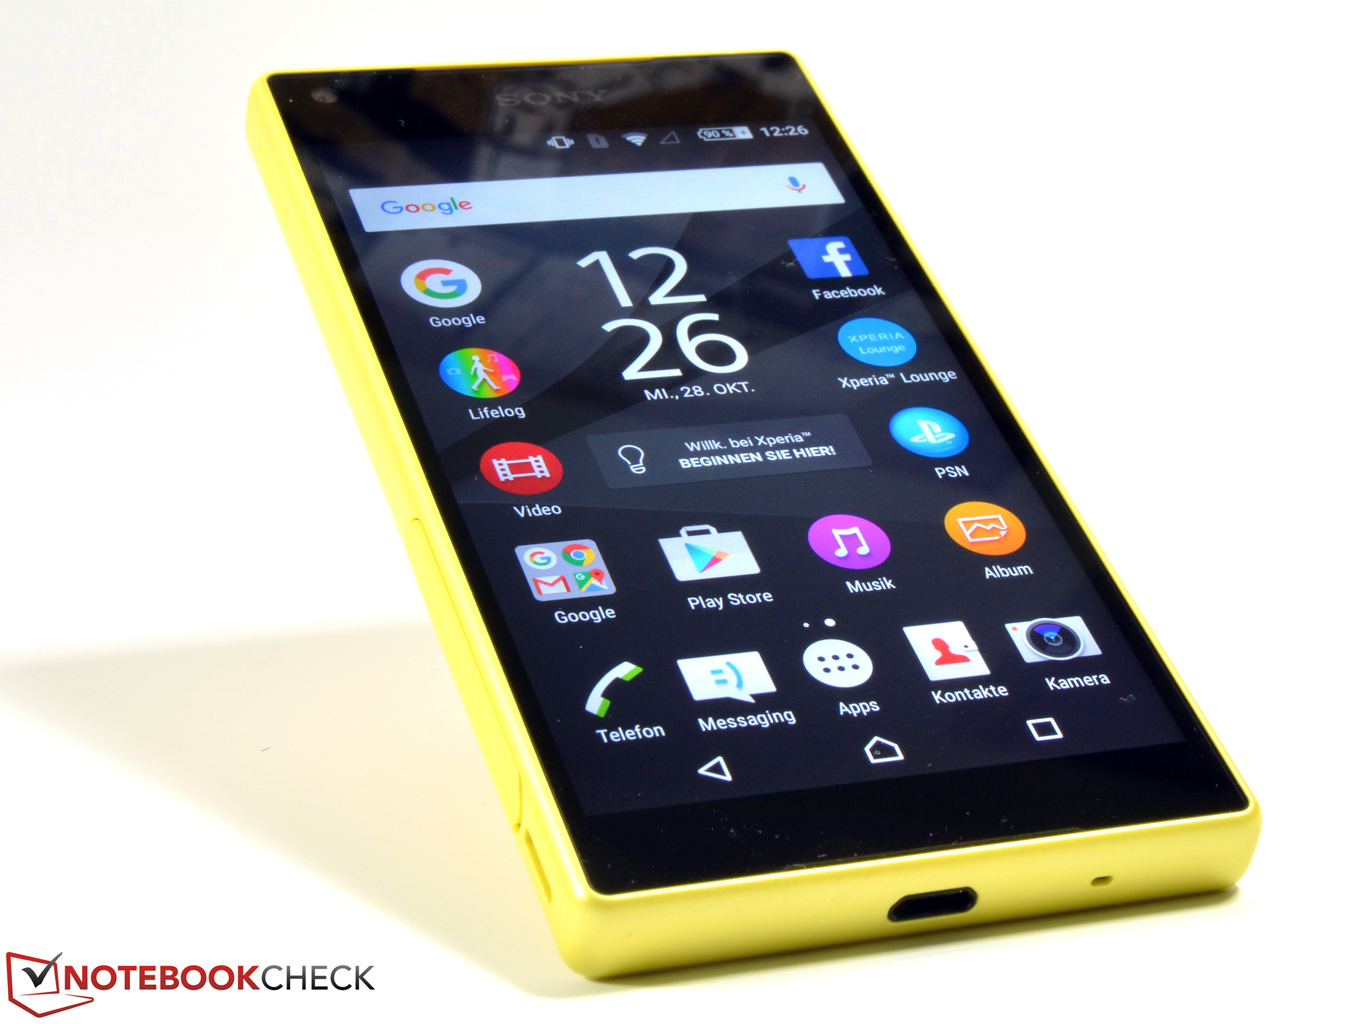 Sony Xperia Z5 Compact Smartphone Review - NotebookCheck.net Reviews